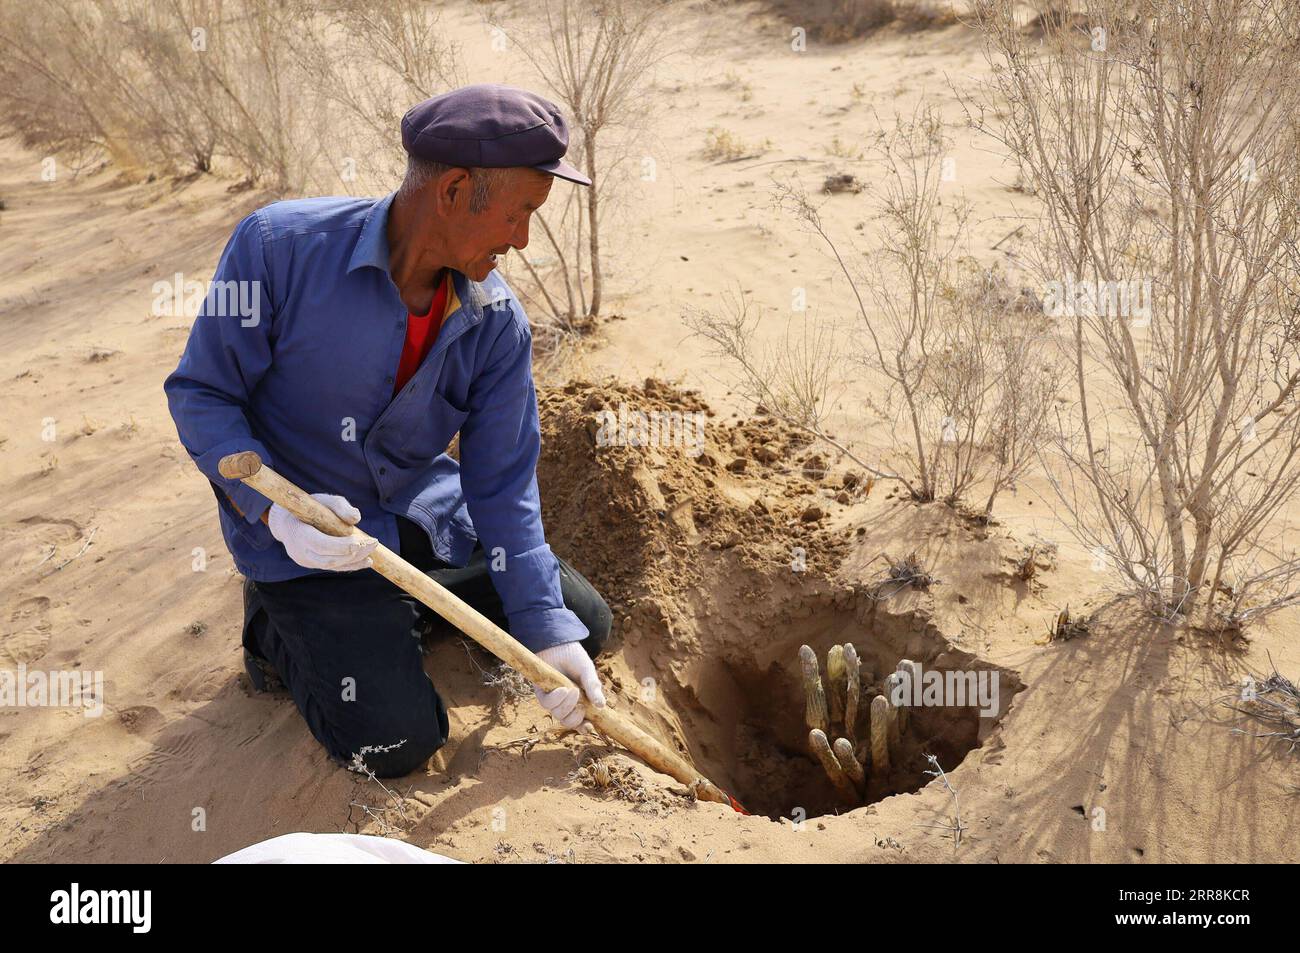 210511 -- HOHHOT, May 11, 2021 -- A farmer harvests cistanche in Bayannur City, north China s Inner Mongolia Autonomous Region, May 8, 2021. Abundant rainfall has brought a good harvest of cistanche, a sand-control plant widely grown on the edge of the Ulan Buh Desert, the eighth-largest in China. Cistanche, dubbed desert ginseng, is a commonly used herb in Chinese medicine prescriptions for its ability to boost immunity. With the role of biological nitrogen fixation and sand control, the plant has grown well with plenty of sunshine and the large temperature difference between night and day in Stock Photo